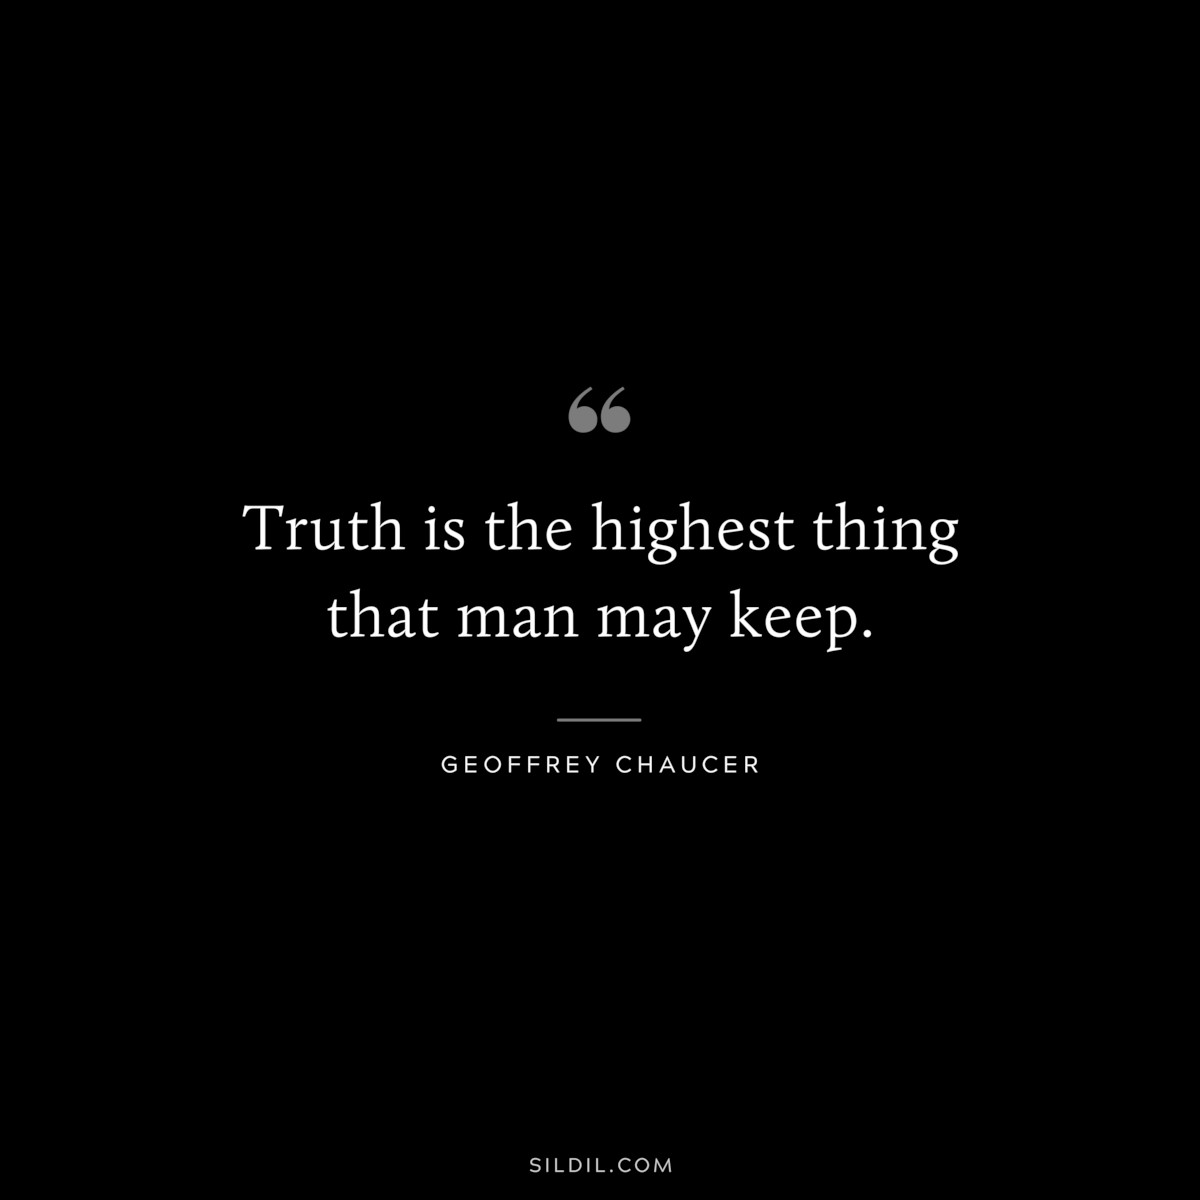 Truth is the highest thing that man may keep. ― Geoffrey Chaucer